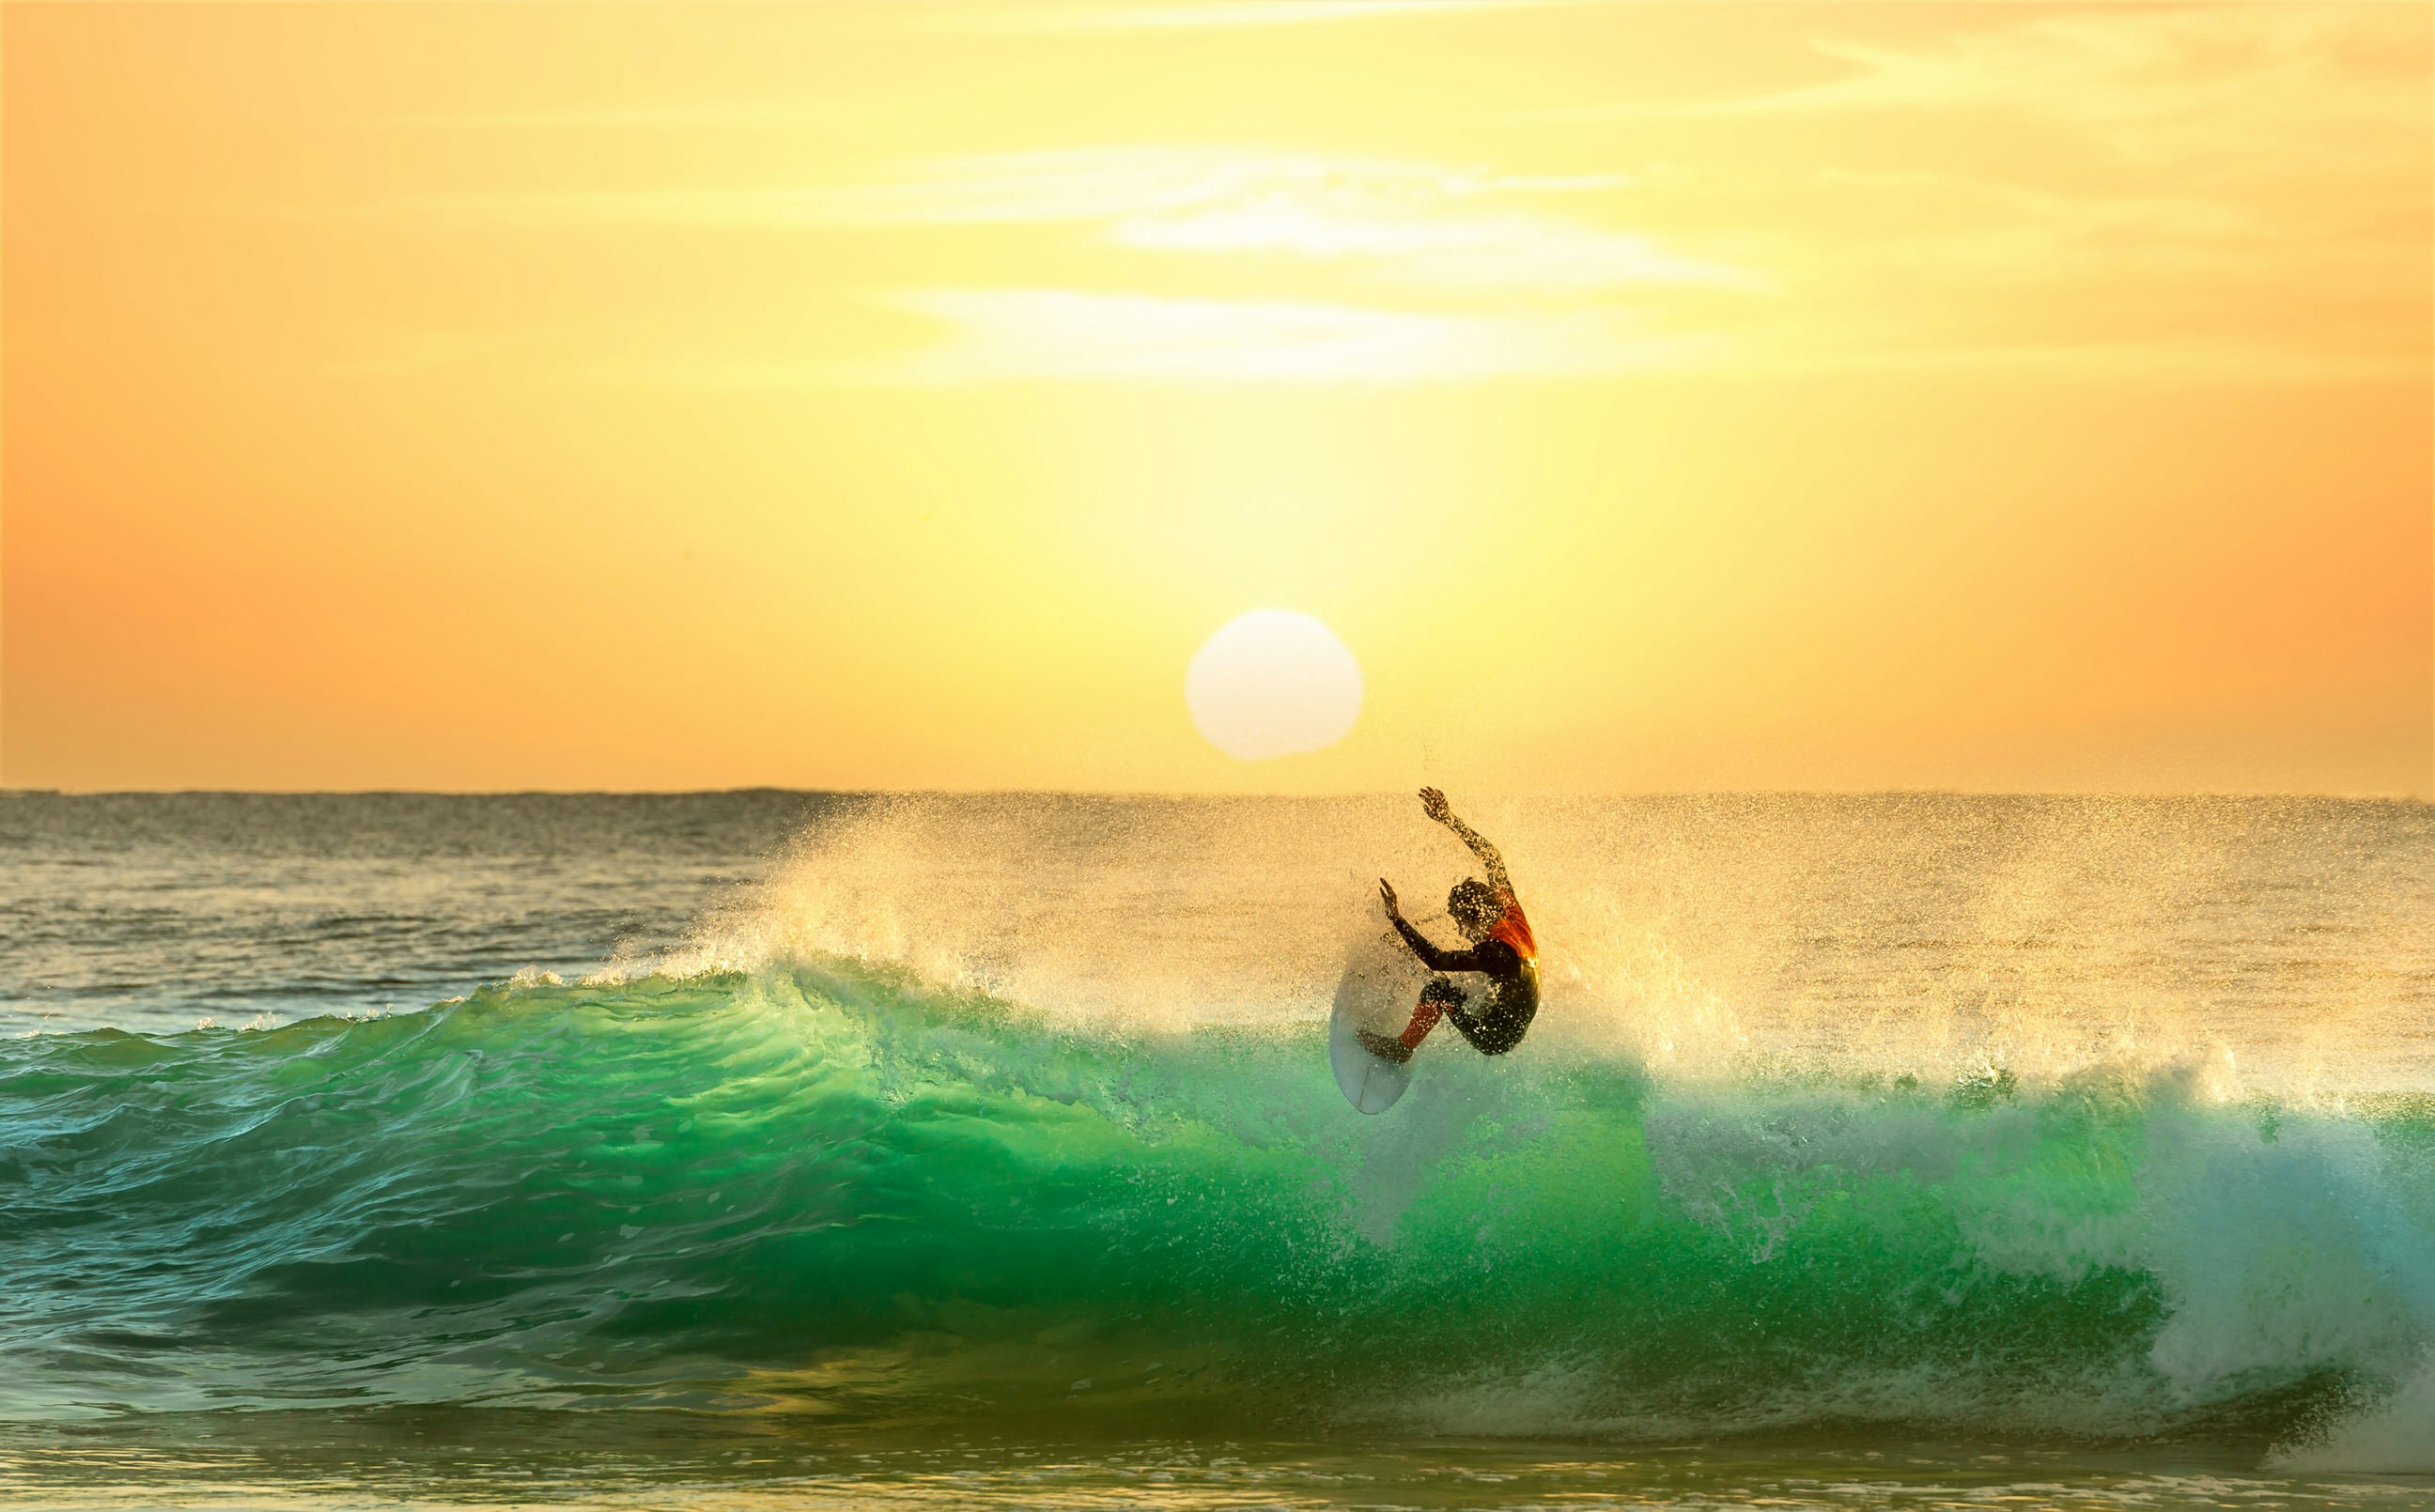 A surfer atop the crest of a wave almost floats in the air; the wave, lit by a sun right on the horizon, is glowing green. The sky is a brilliant gold colour.